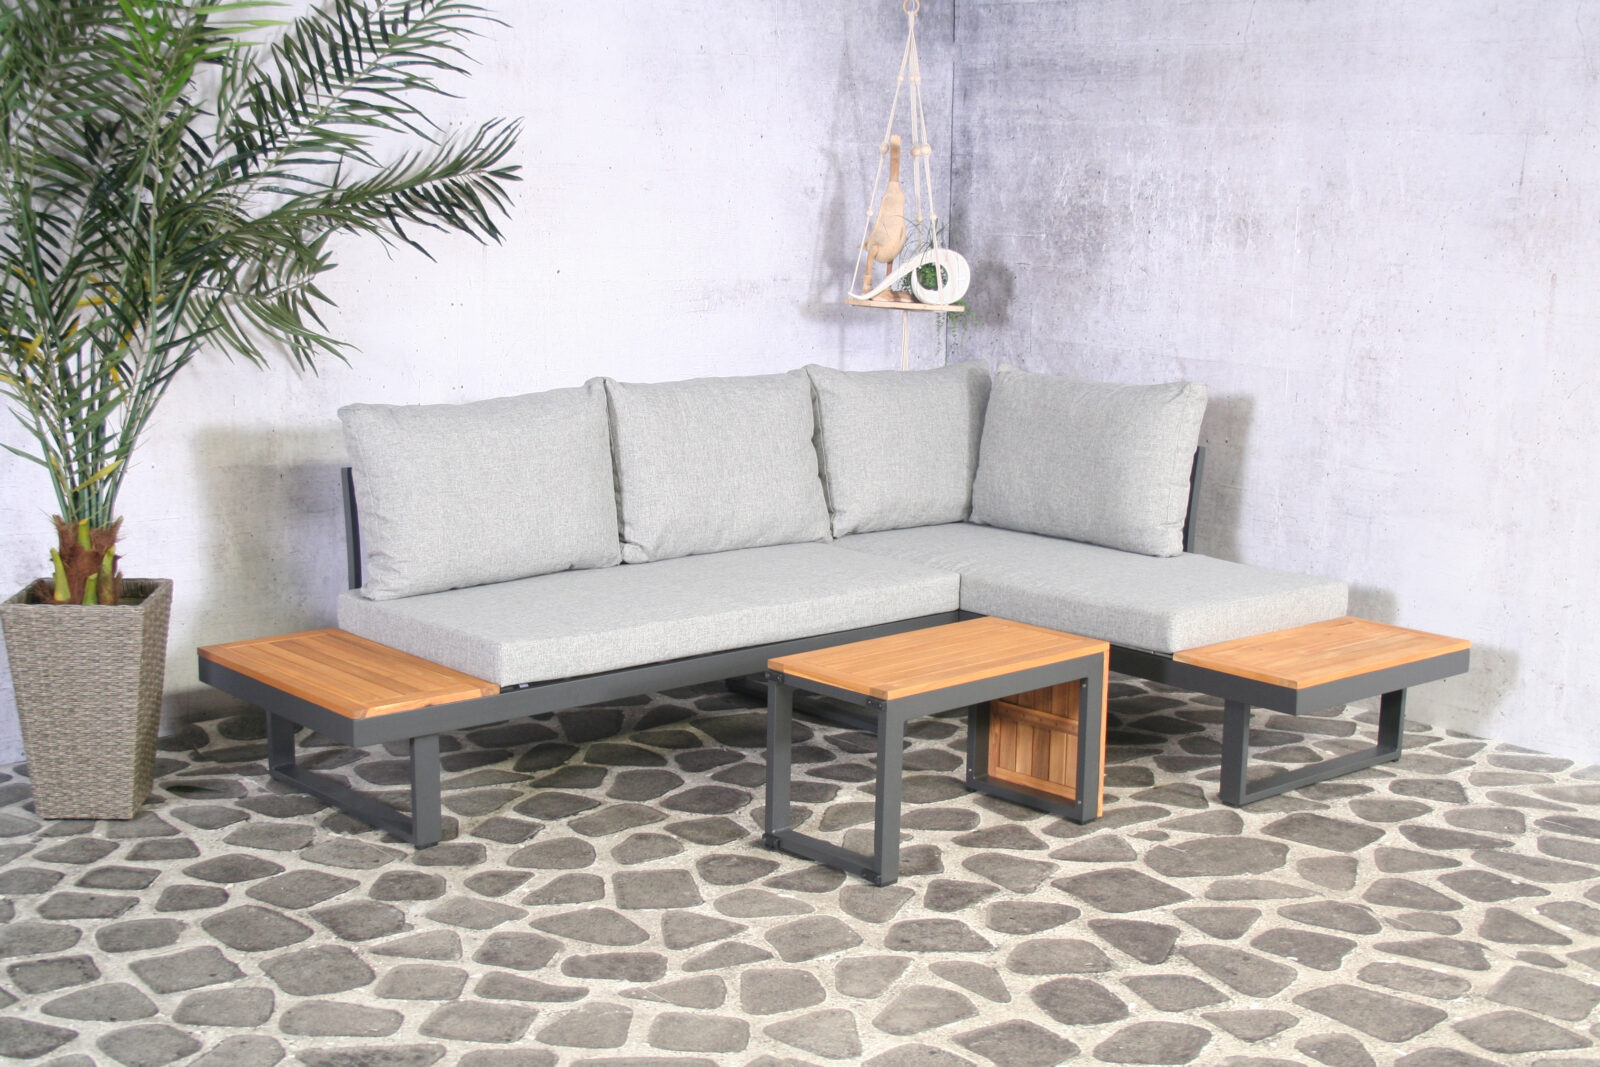 Loungeset Olympia | Multifunctioneel | 4-persoons Olympia loungeset 35130 9 scaled